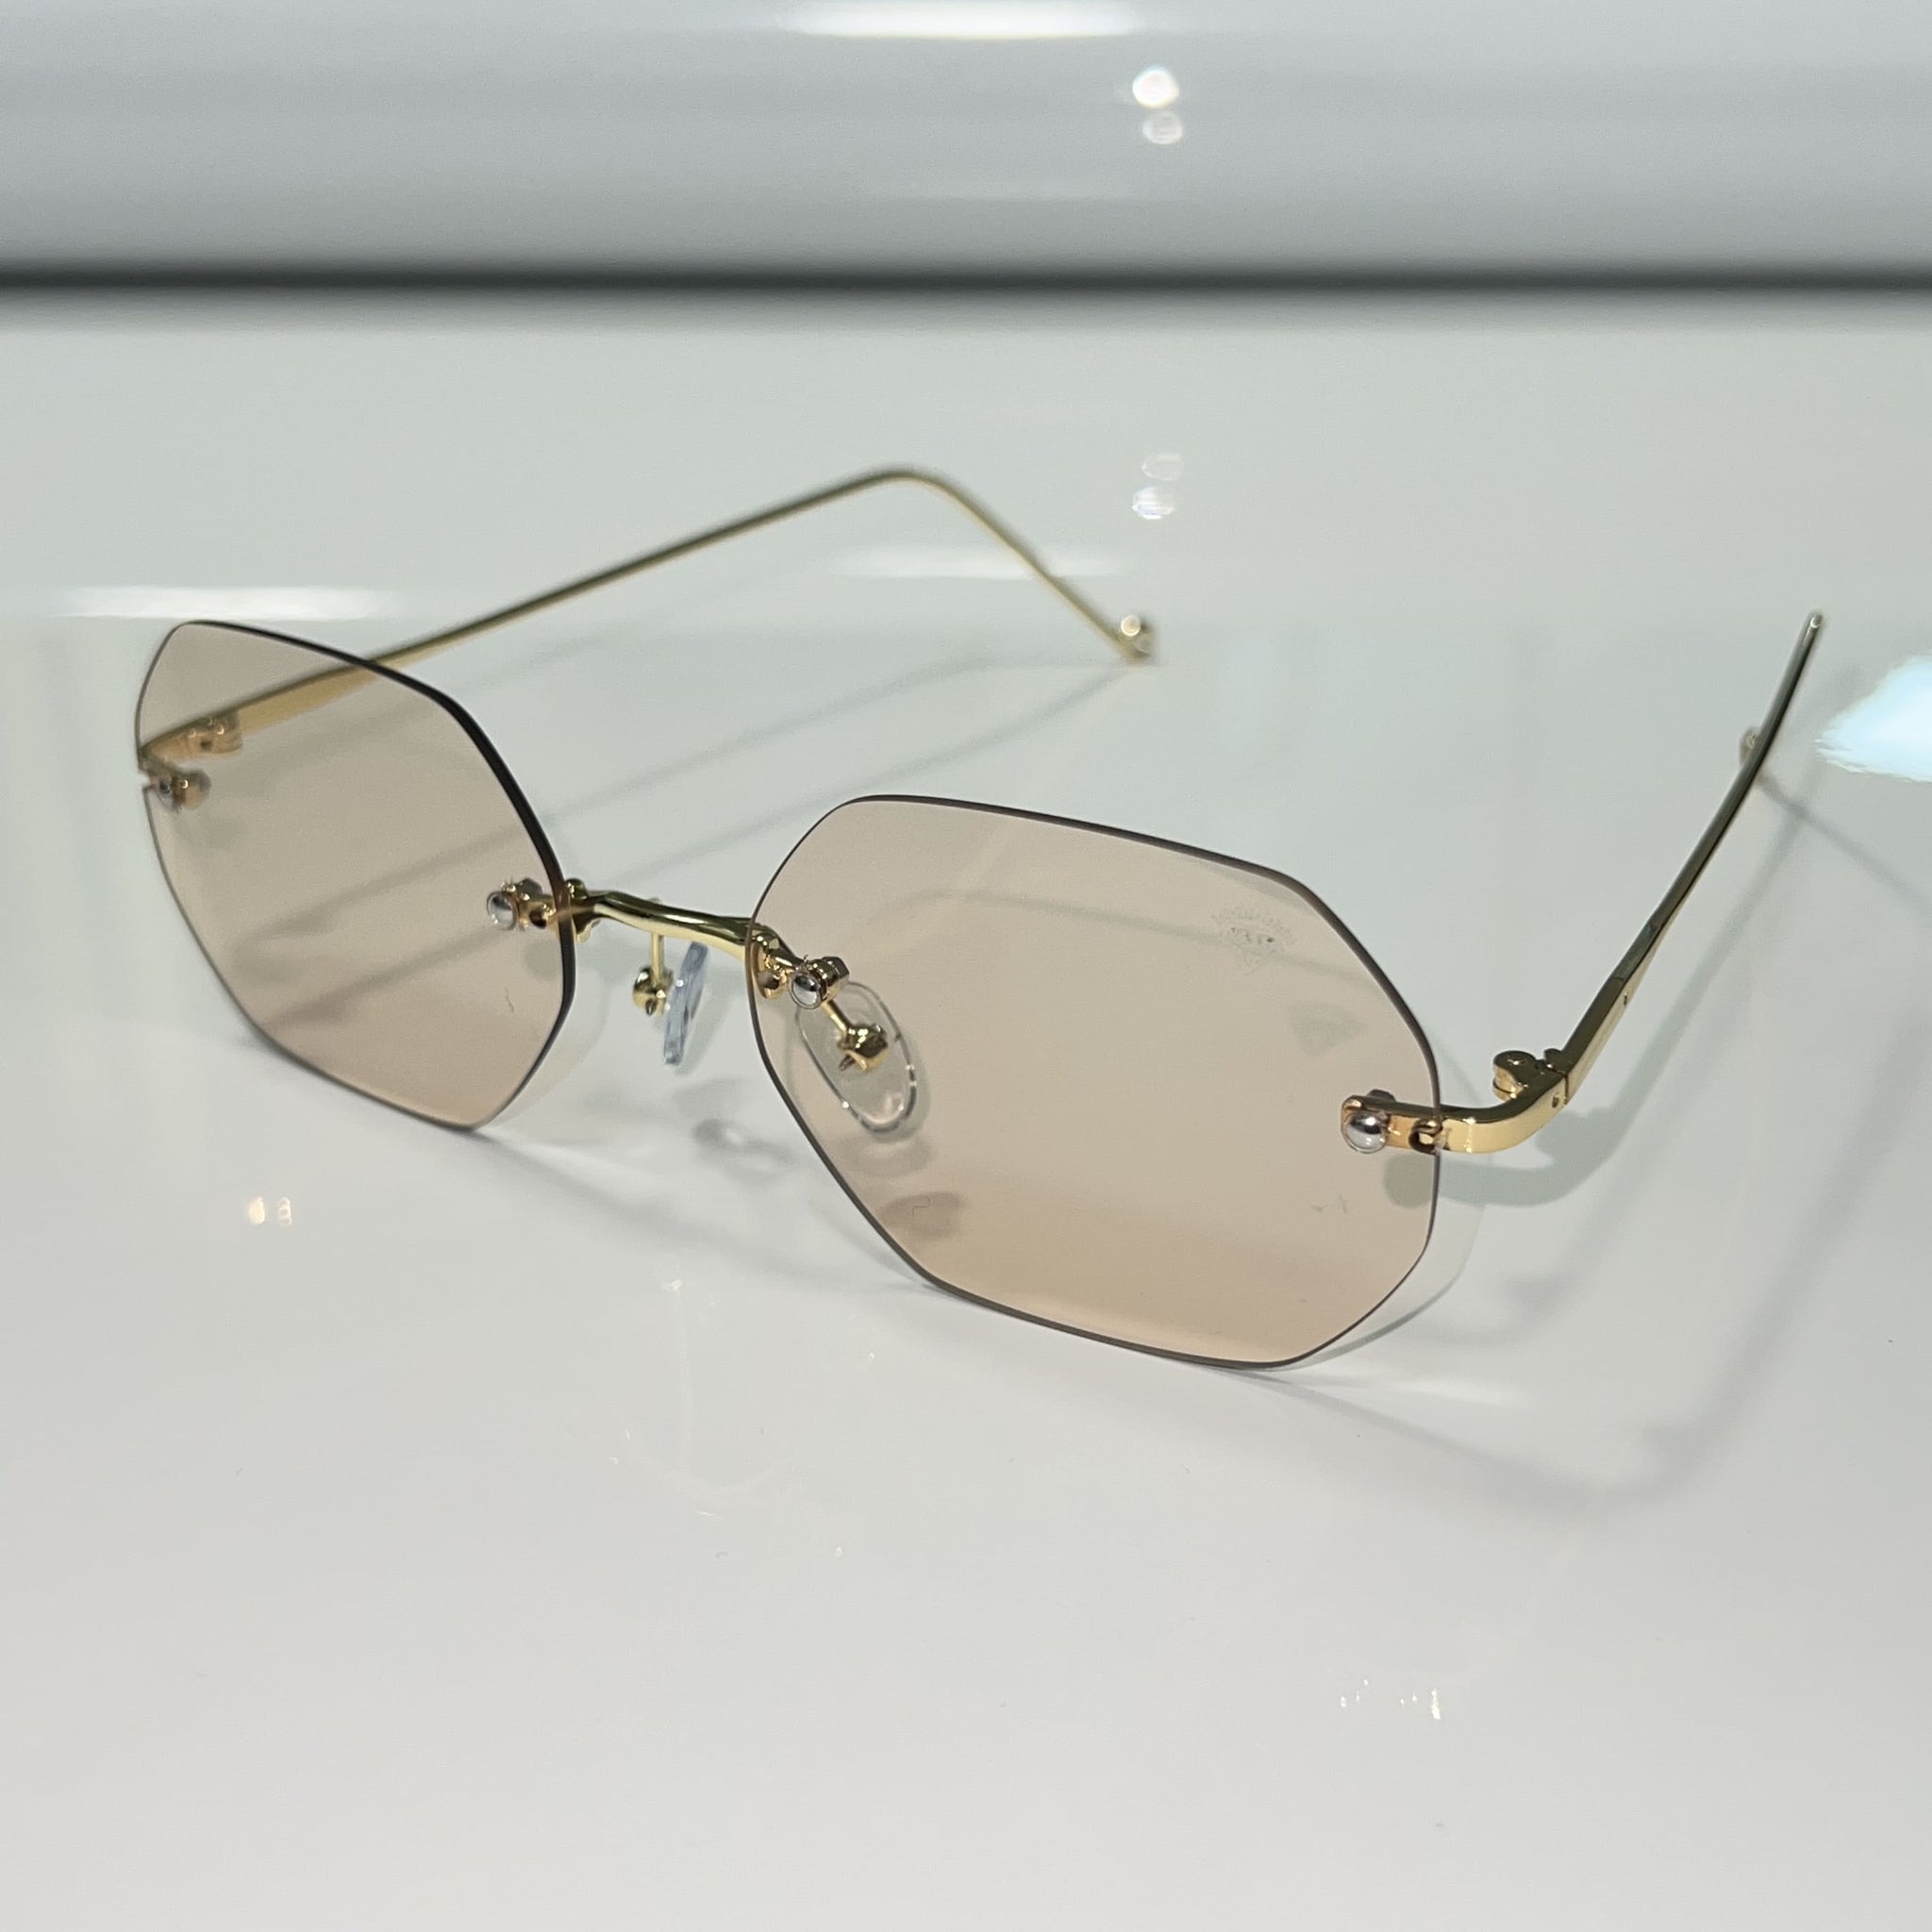 Star Glasses - Sehgal Glasses - 14k gold plated - Champagne Shade